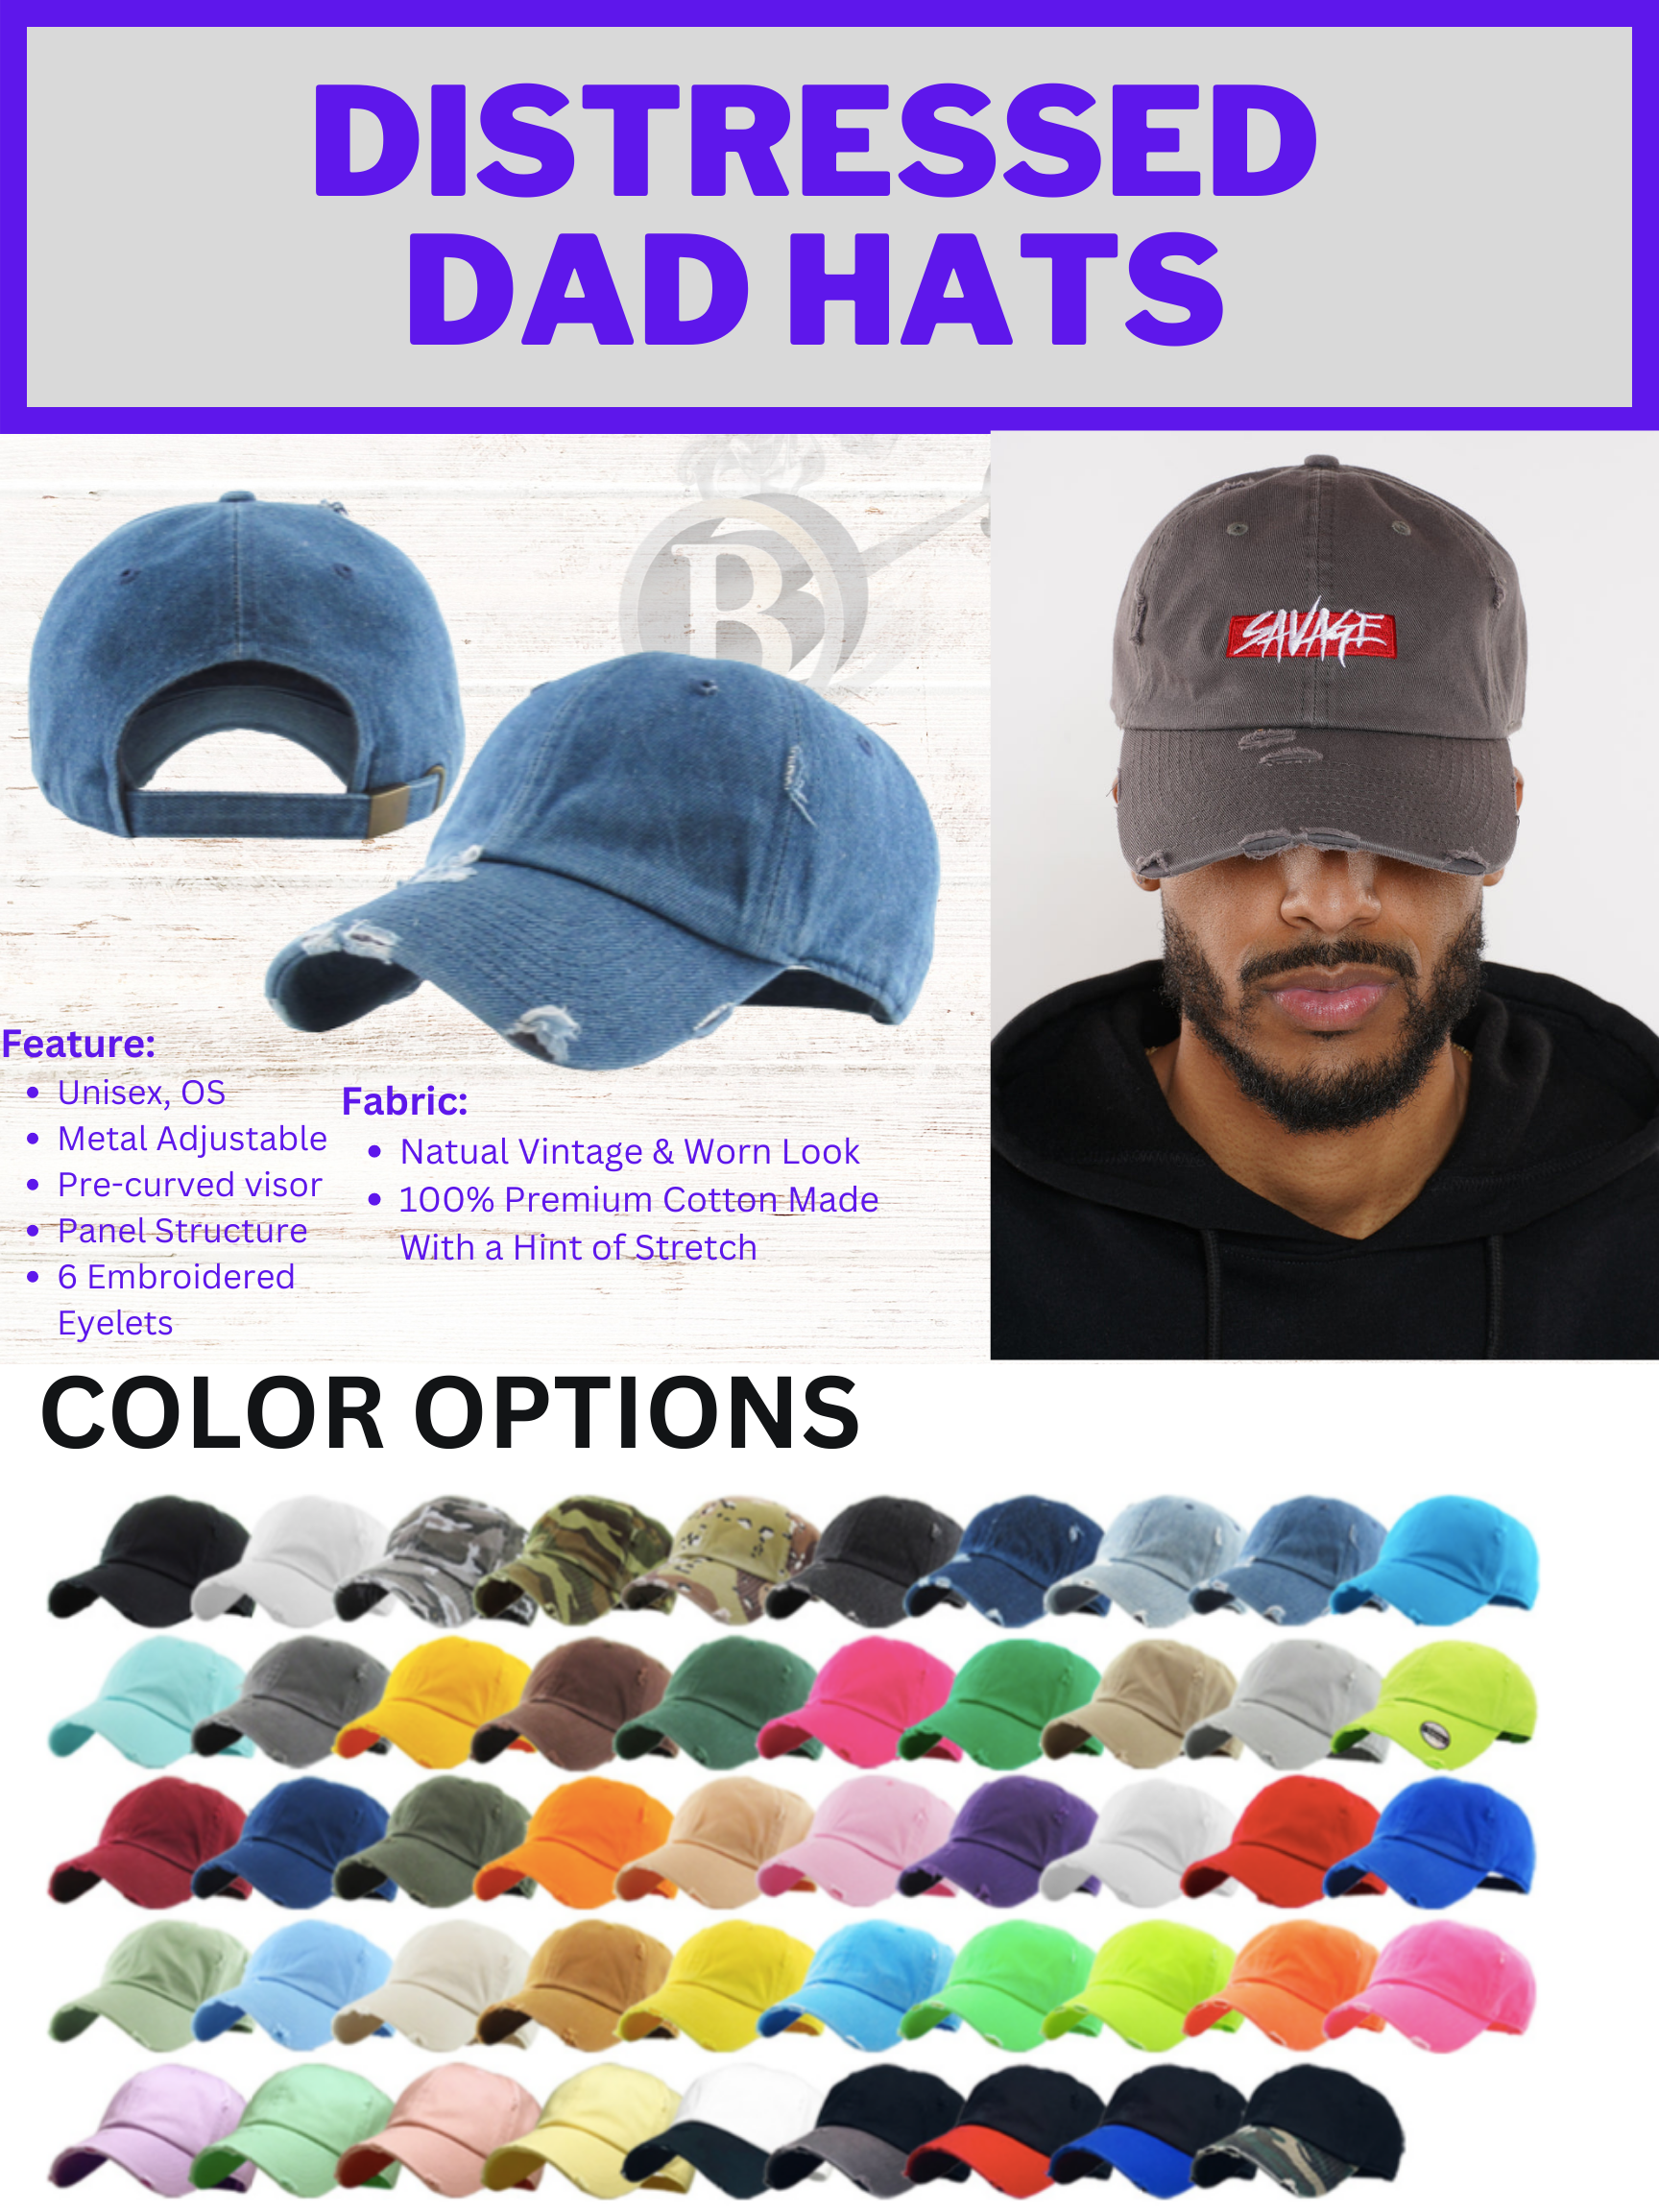 KBE-VINTAGE Custom Embroidered Dad Hats, Baseball caps, Distressed style caps, hats 